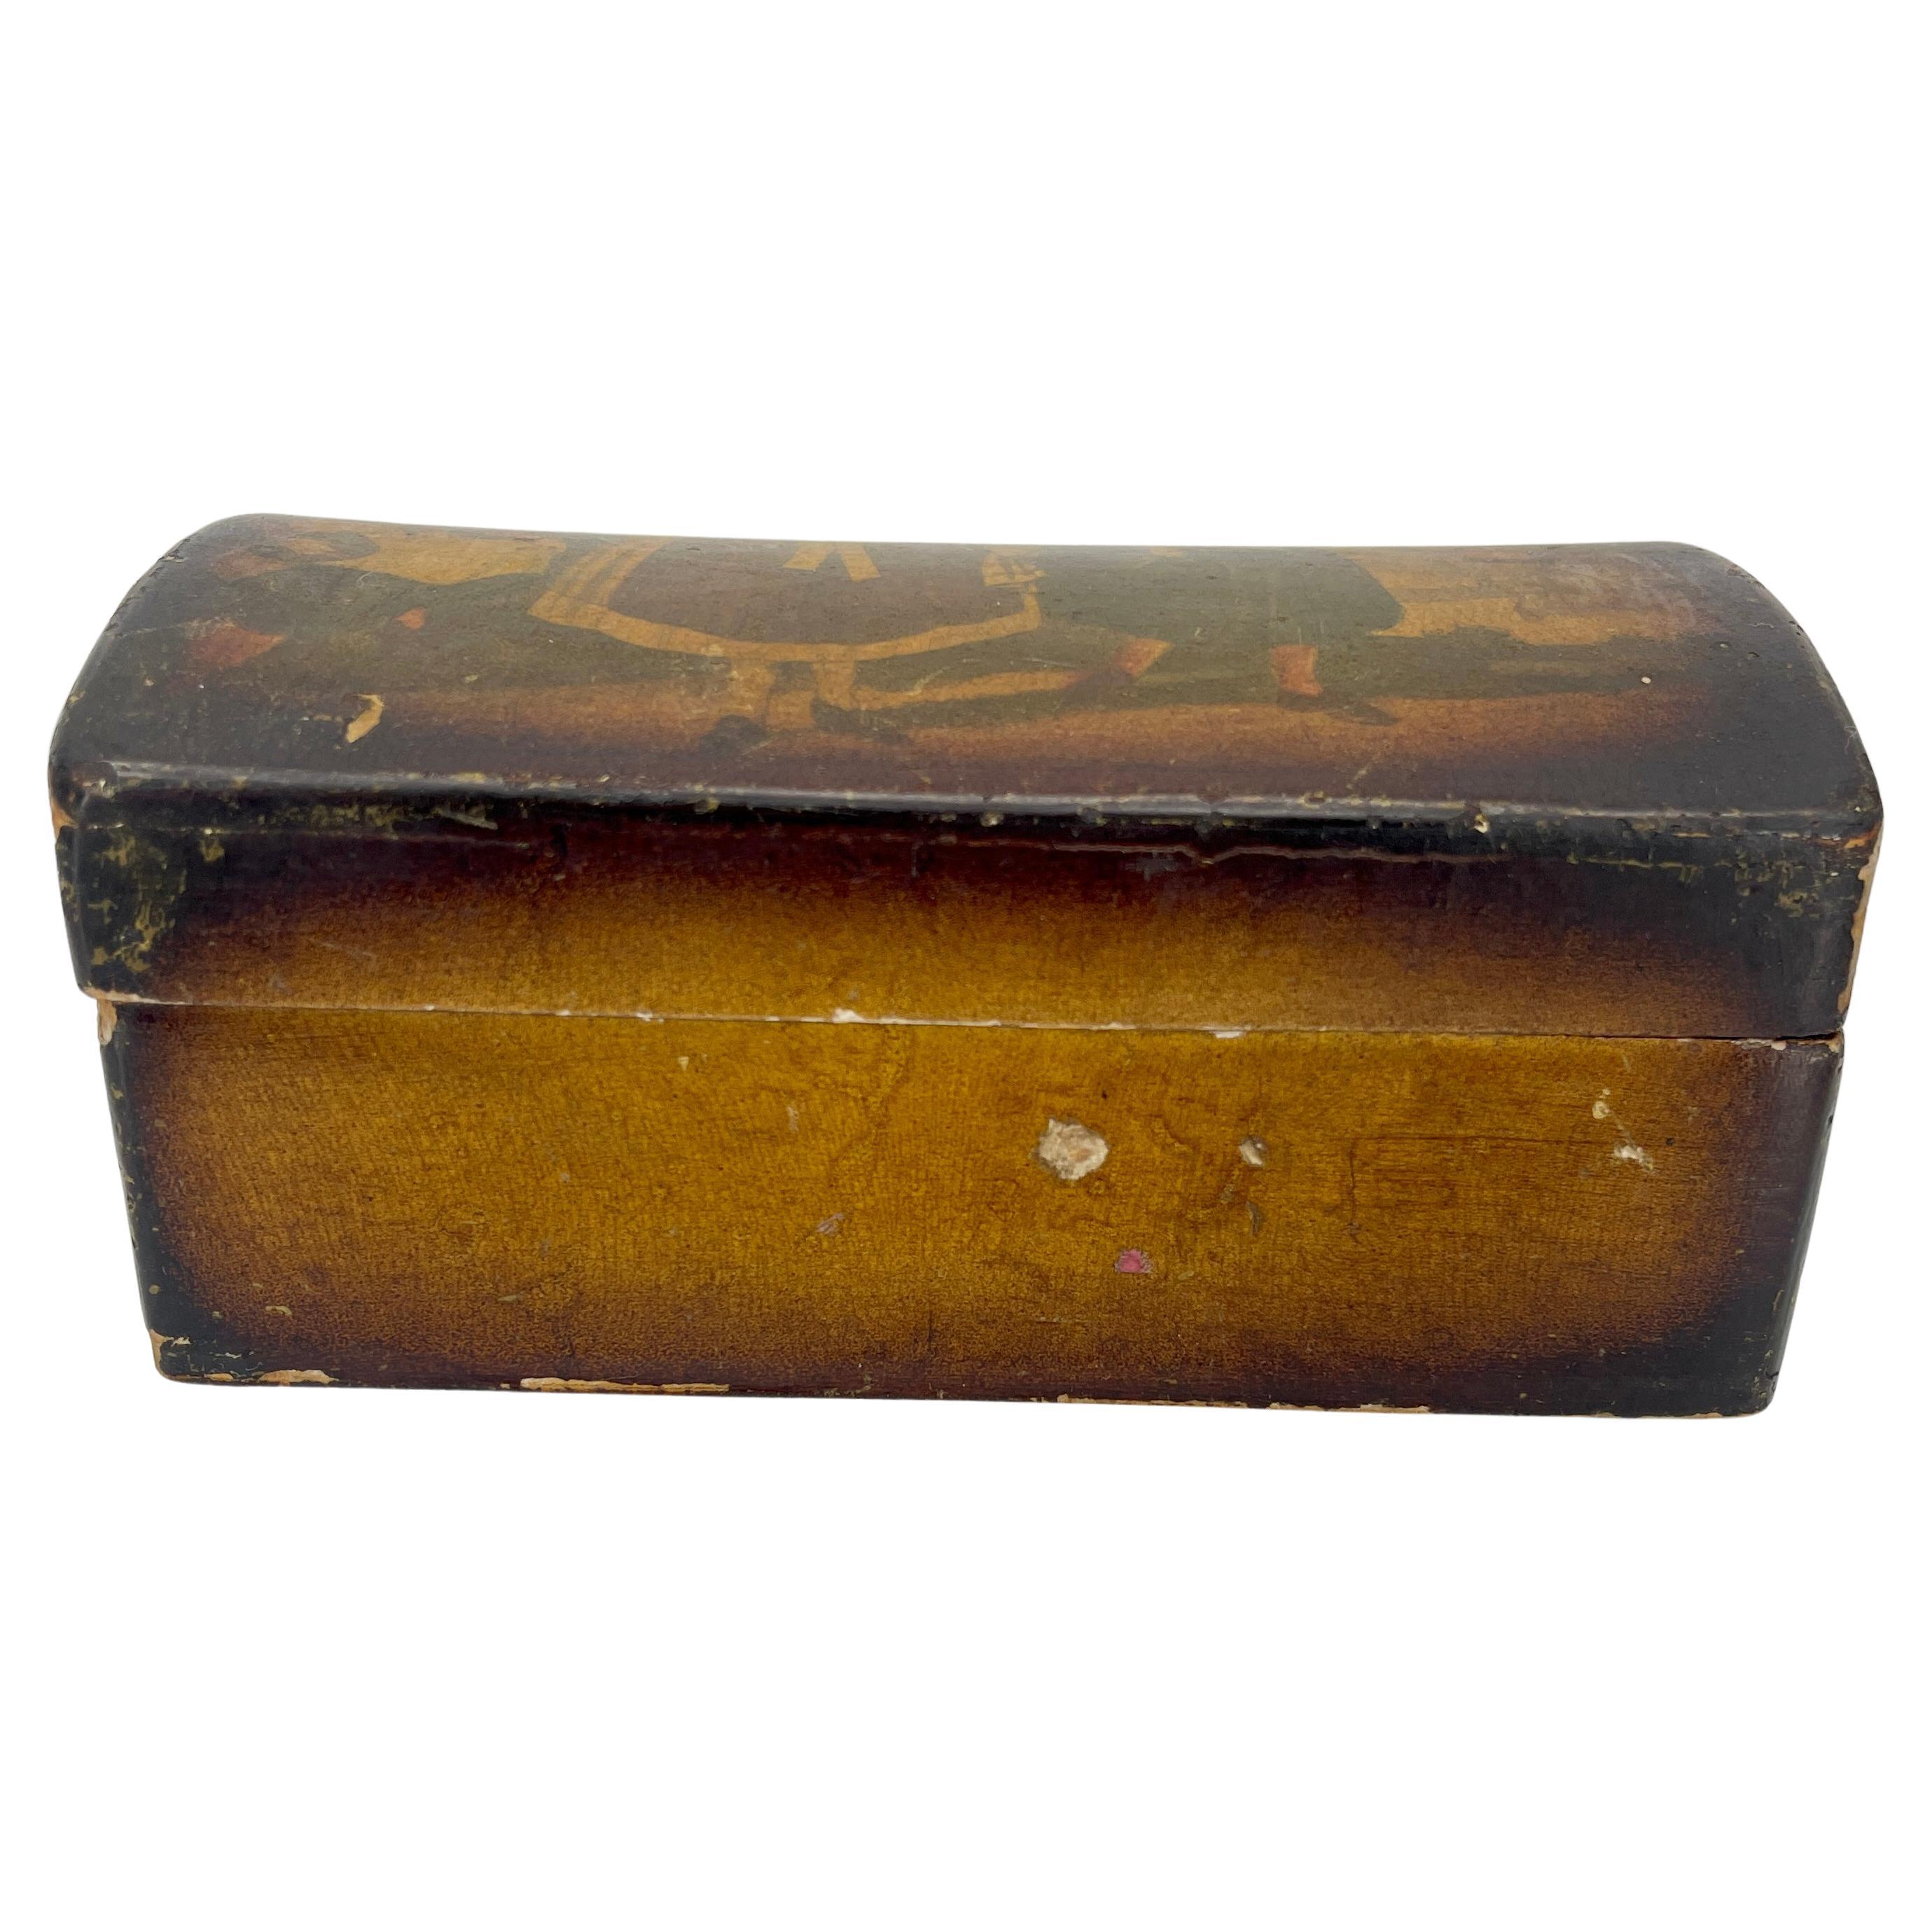 Italian Jewelry or Decorative Box, Early 20th Century For Sale 1